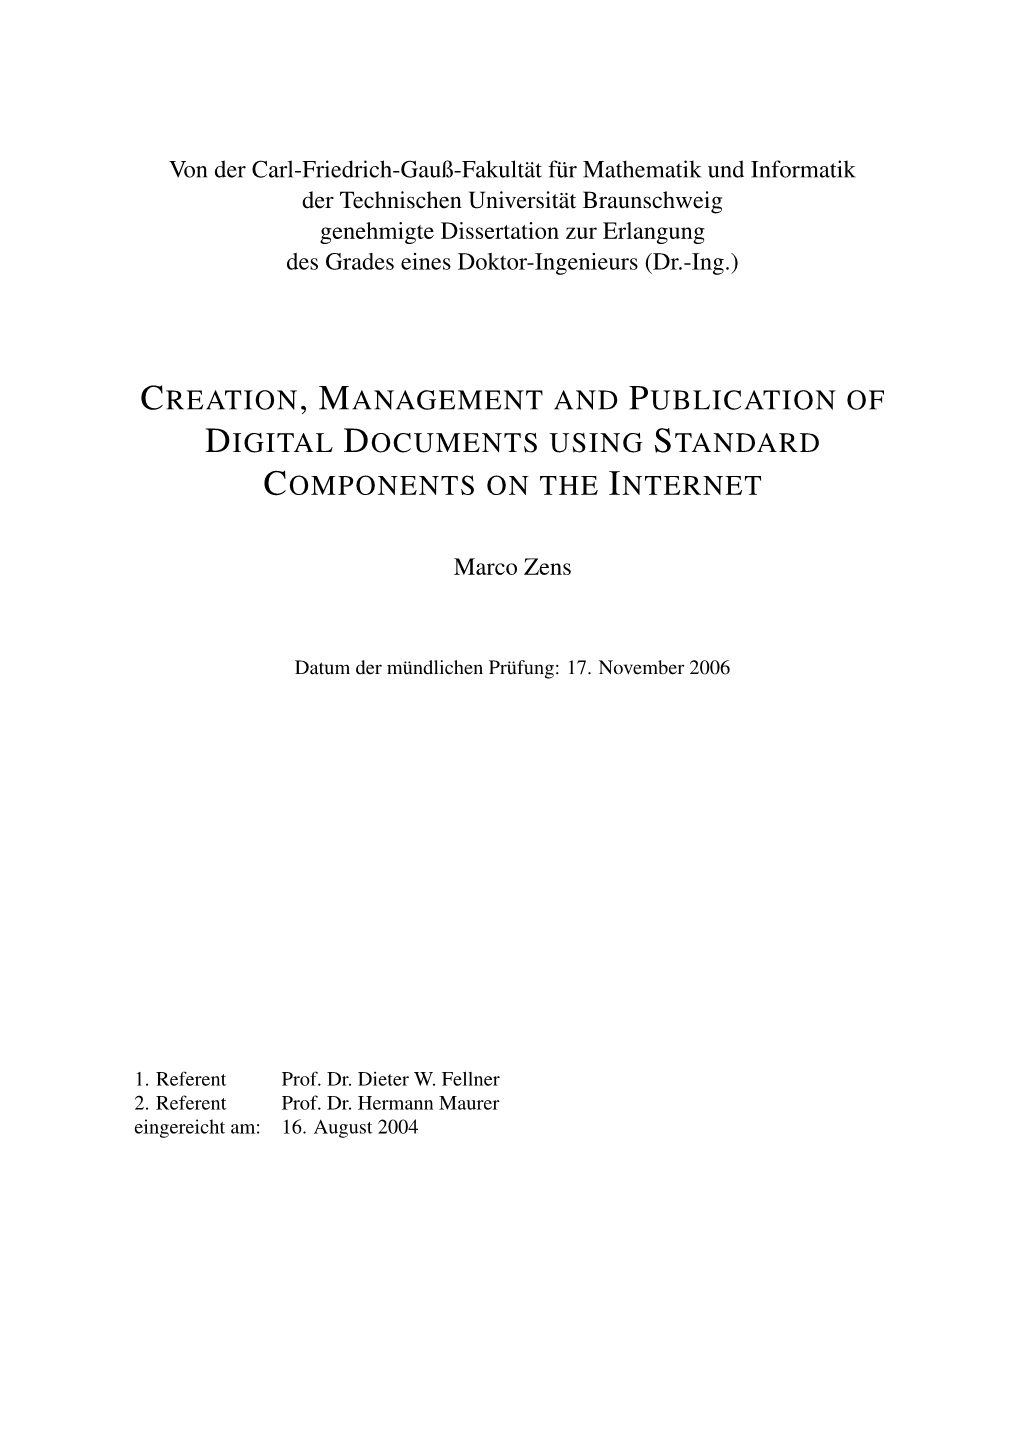 Creation, Management and Publication of Digital Documents Using Standard Components on the Internet